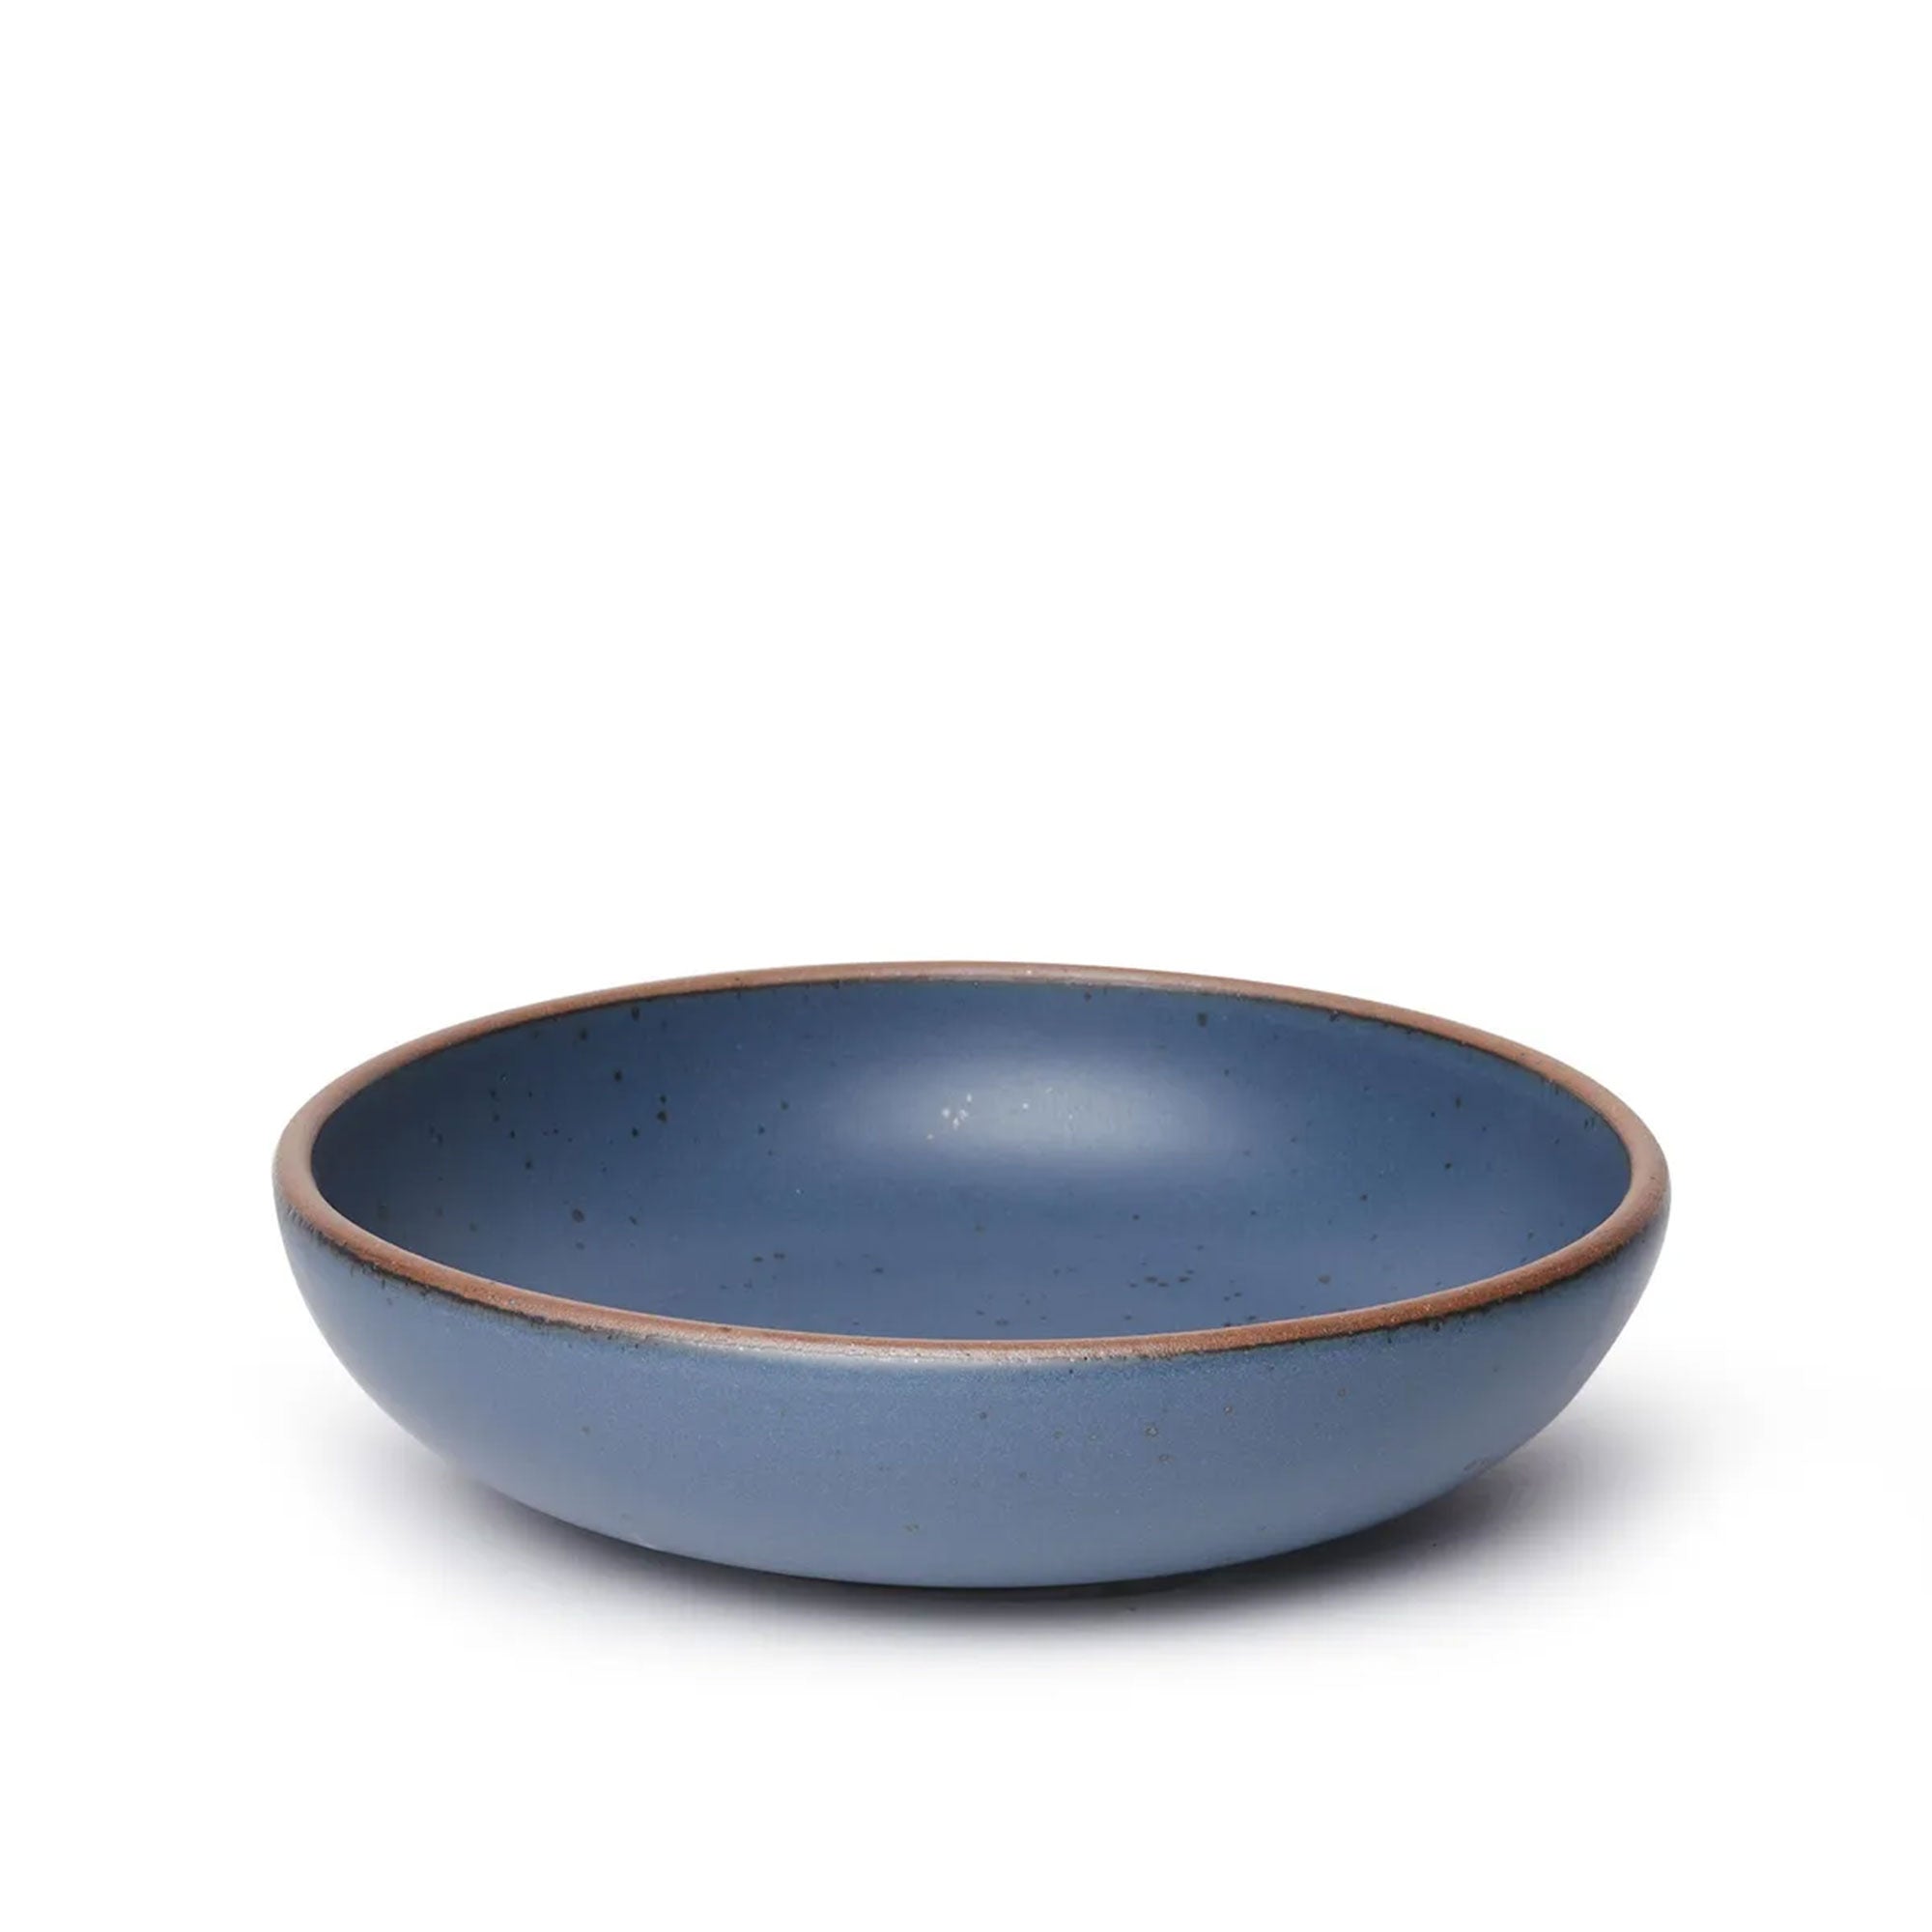 East Fork Pottery Weeknight Serving Bowl